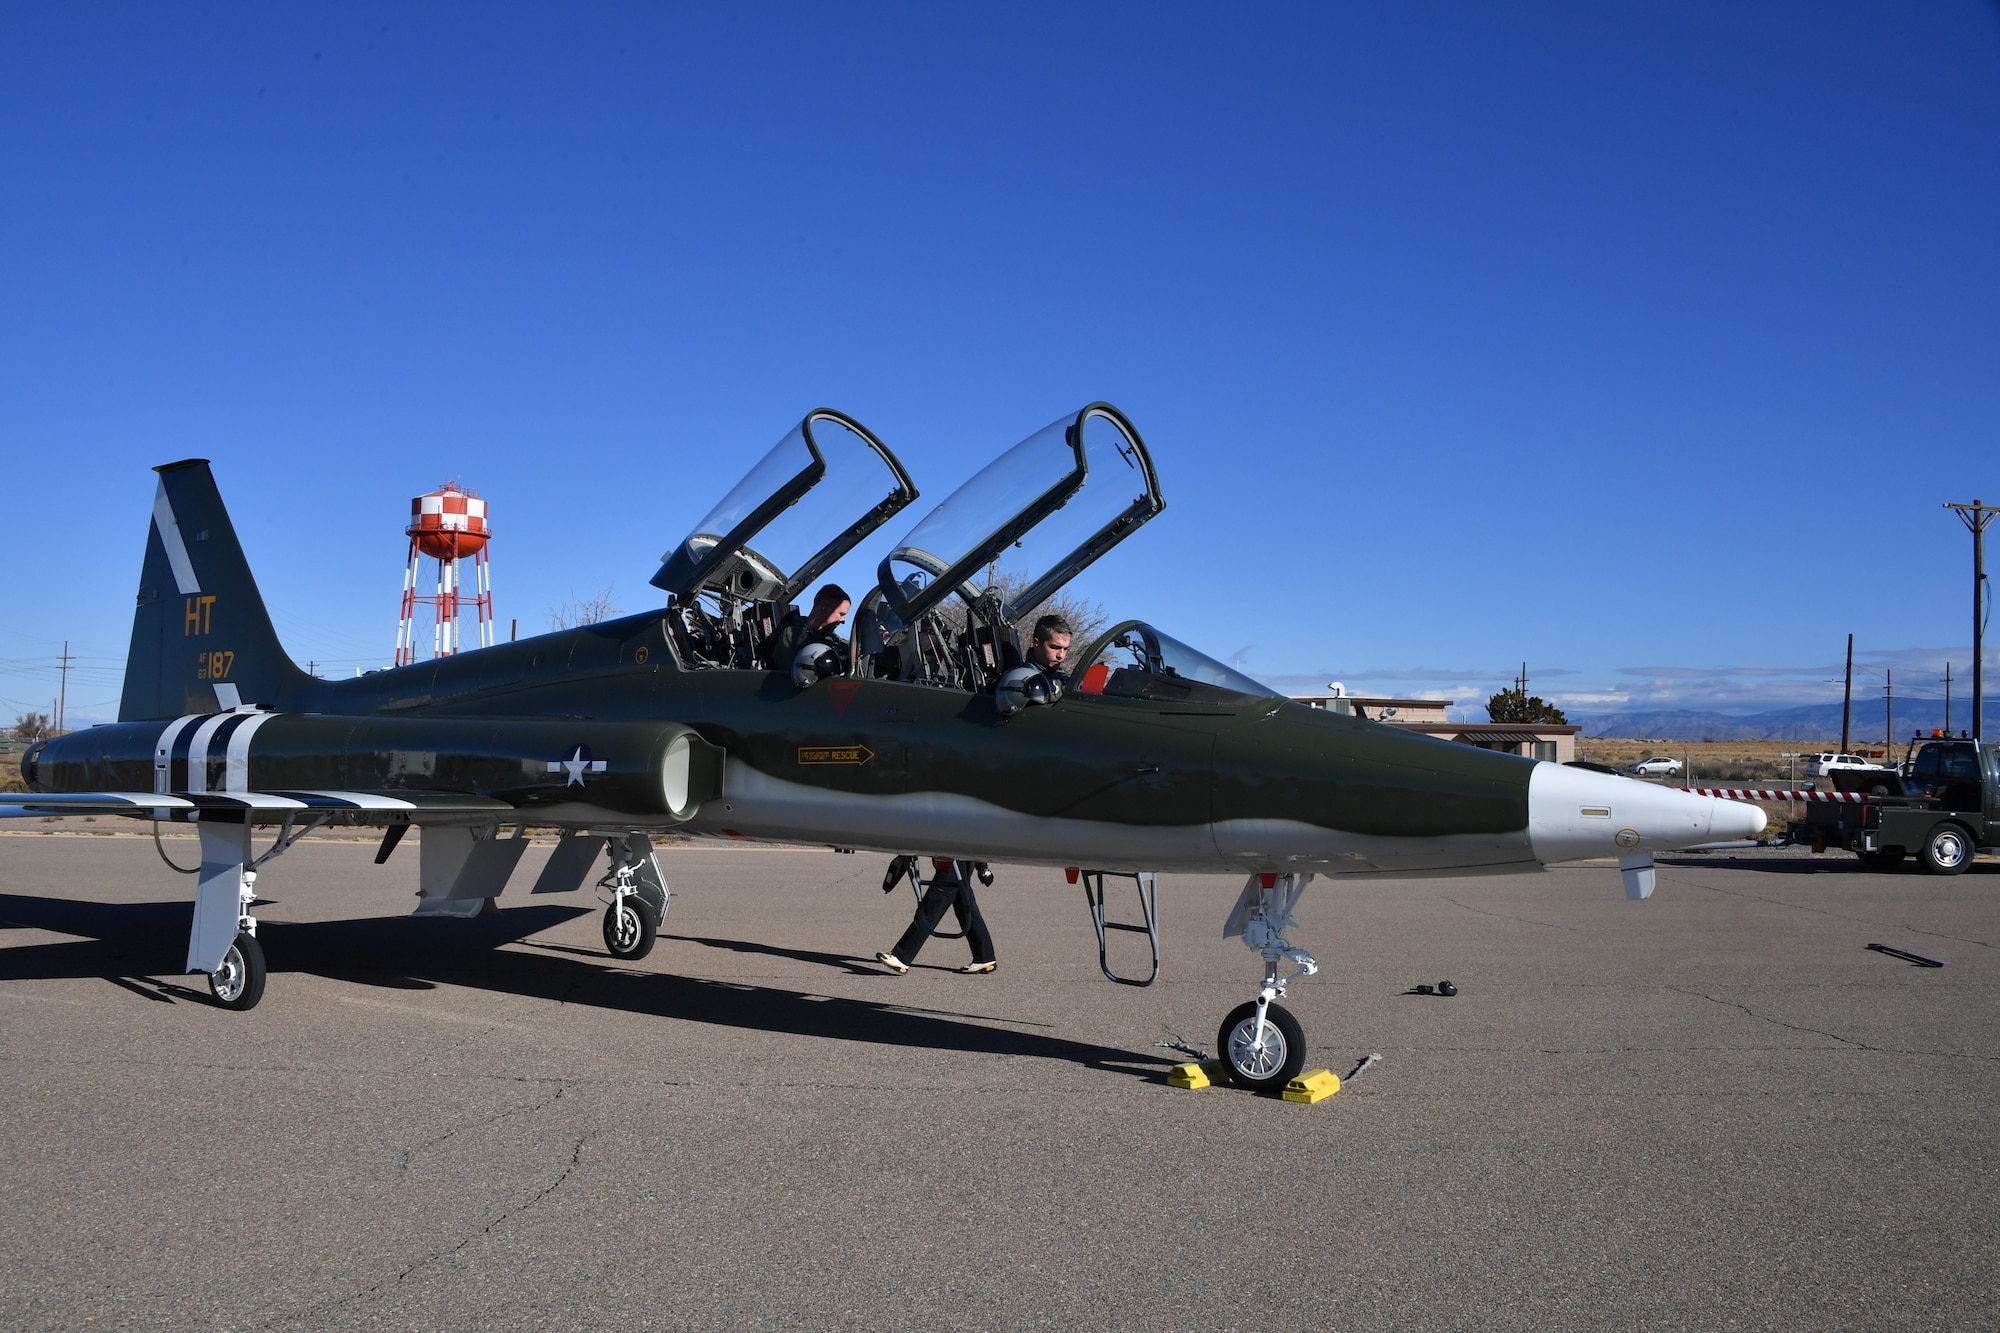 A T-38 Talon crew, Maj. Scott Pontzer, front cockpit, and Capt. Trevor Breau, from the 586th Flight Test Squadron, 704th Test Group, Arnold Engineering Development Complex, prepare for a test flight with Kubernetes software onboard, Dec. 11, 2020. (U.S. Air Force photo)